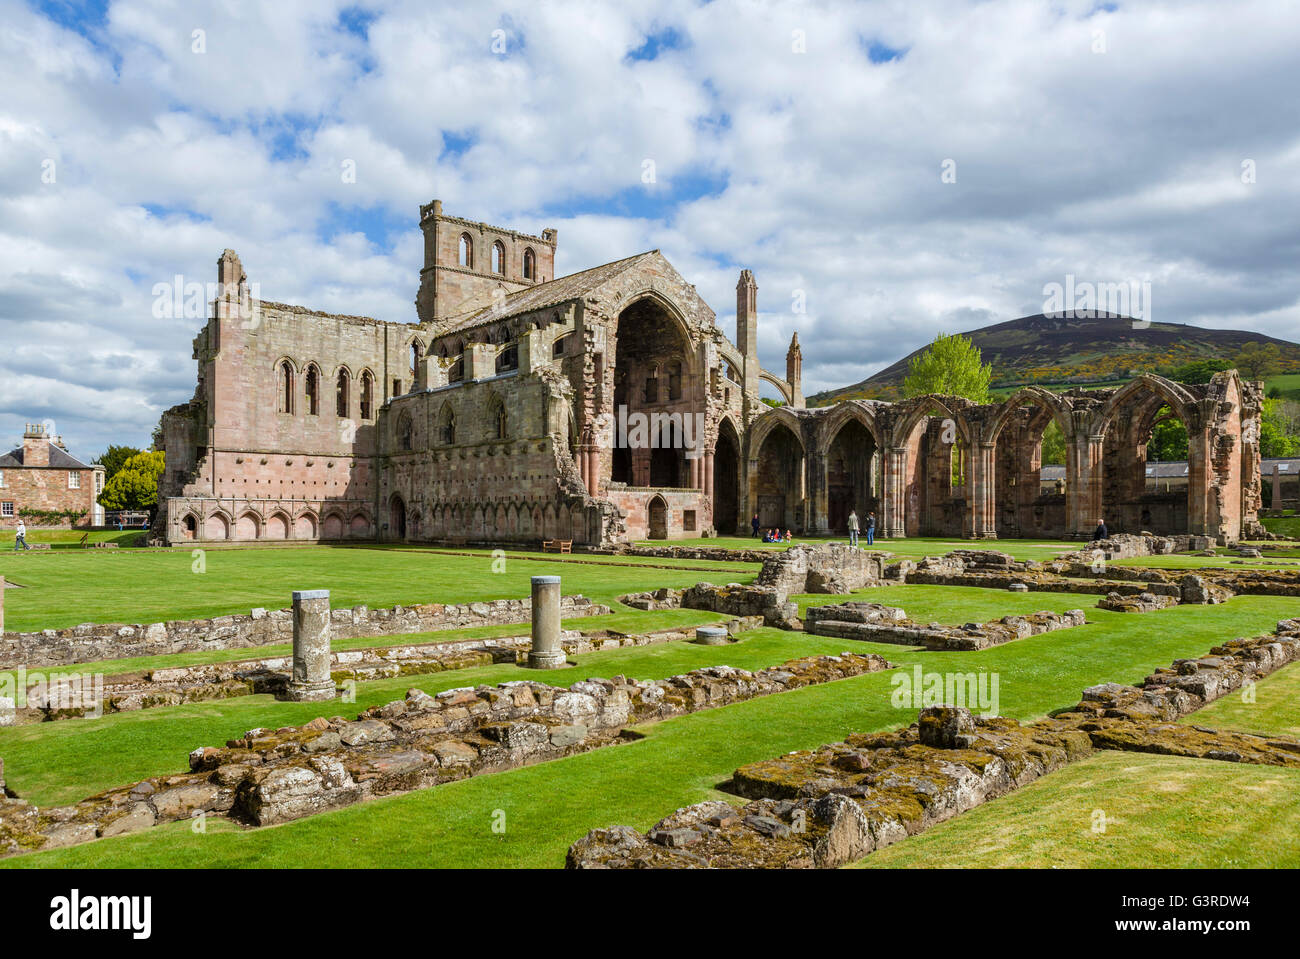 Ruins of Melrose Abbey (St Mary's Abbey), a Cistercian monastery founded in 1136 in Melrose, Scottish Borders, Scotland, UK Stock Photo